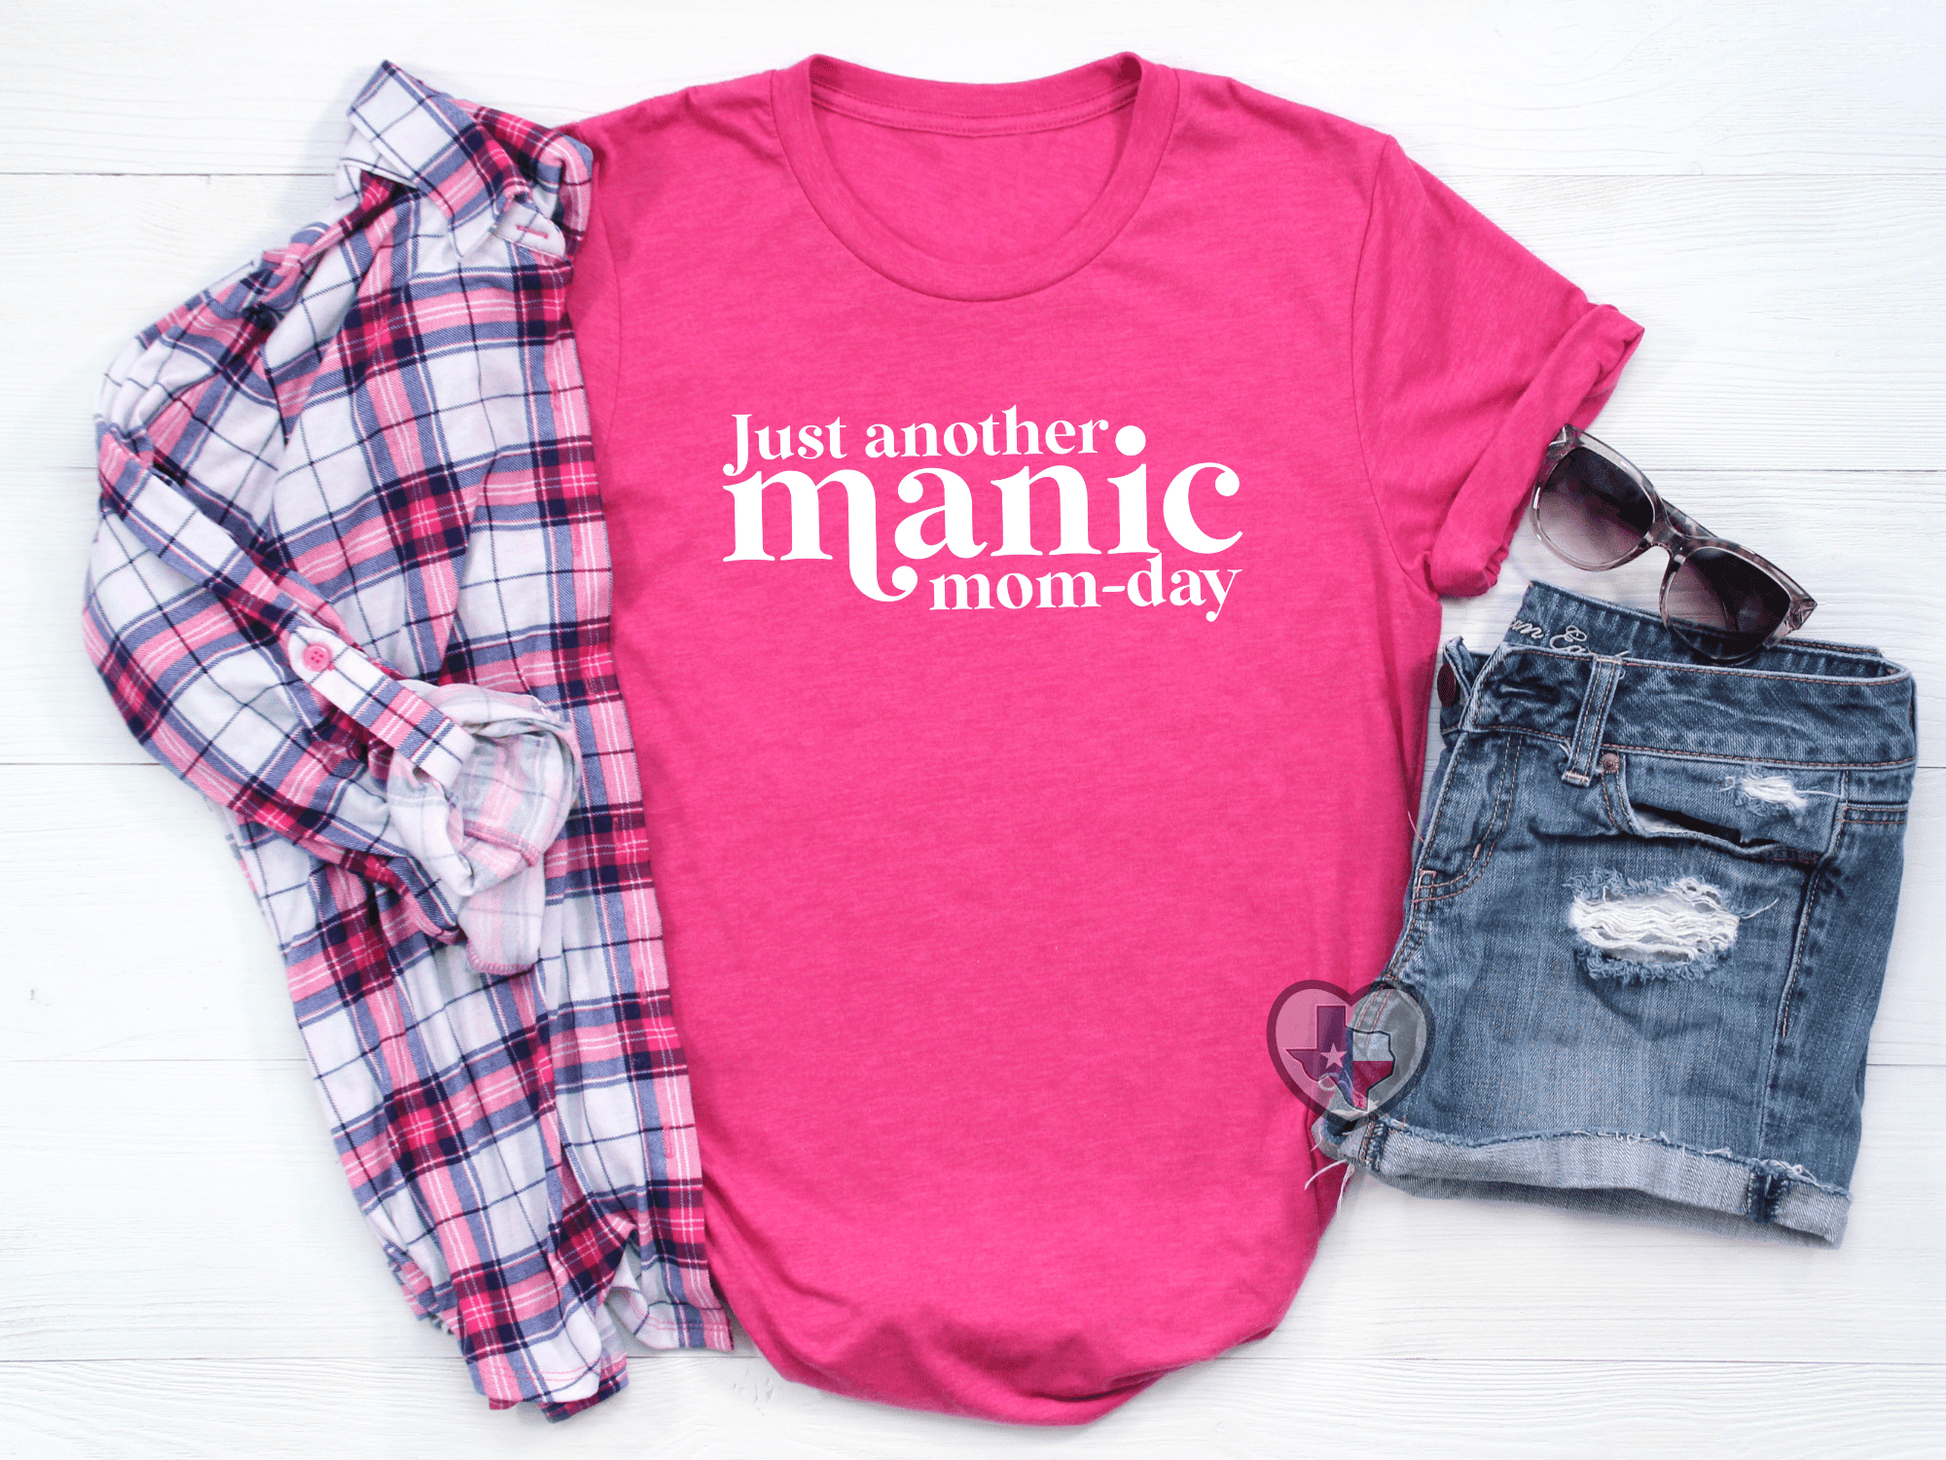 Manic Mom-Day - Texas Transfers and Designs